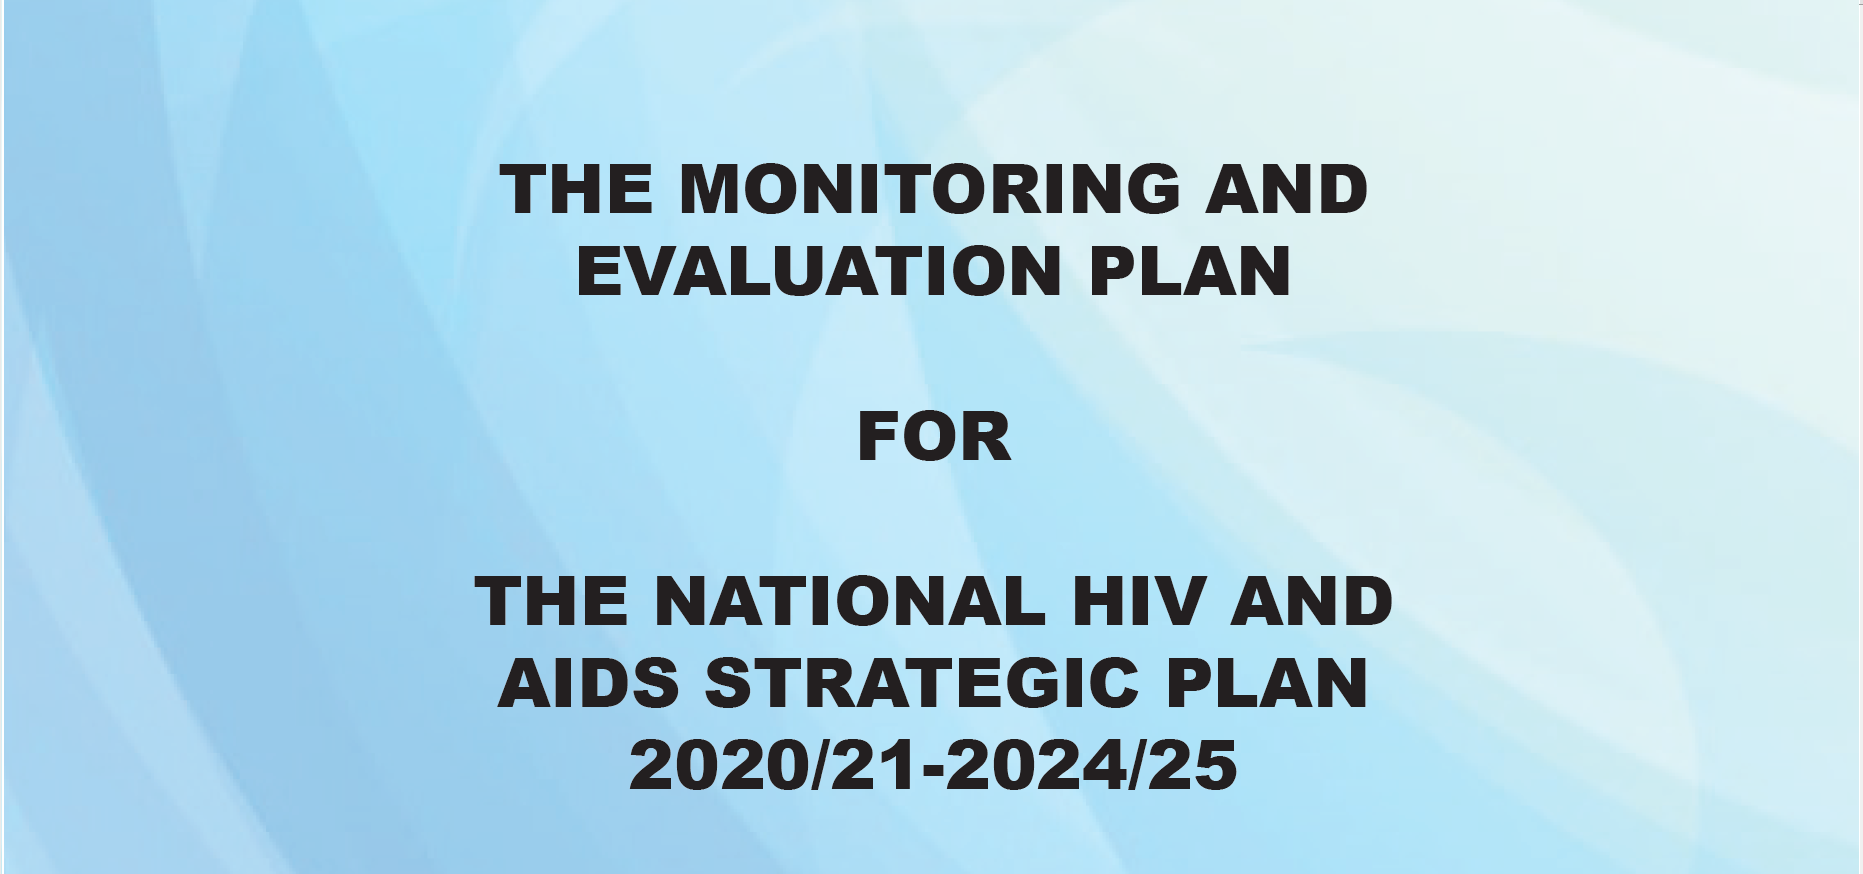 THE MONITORING AND EVALUATION PLAN